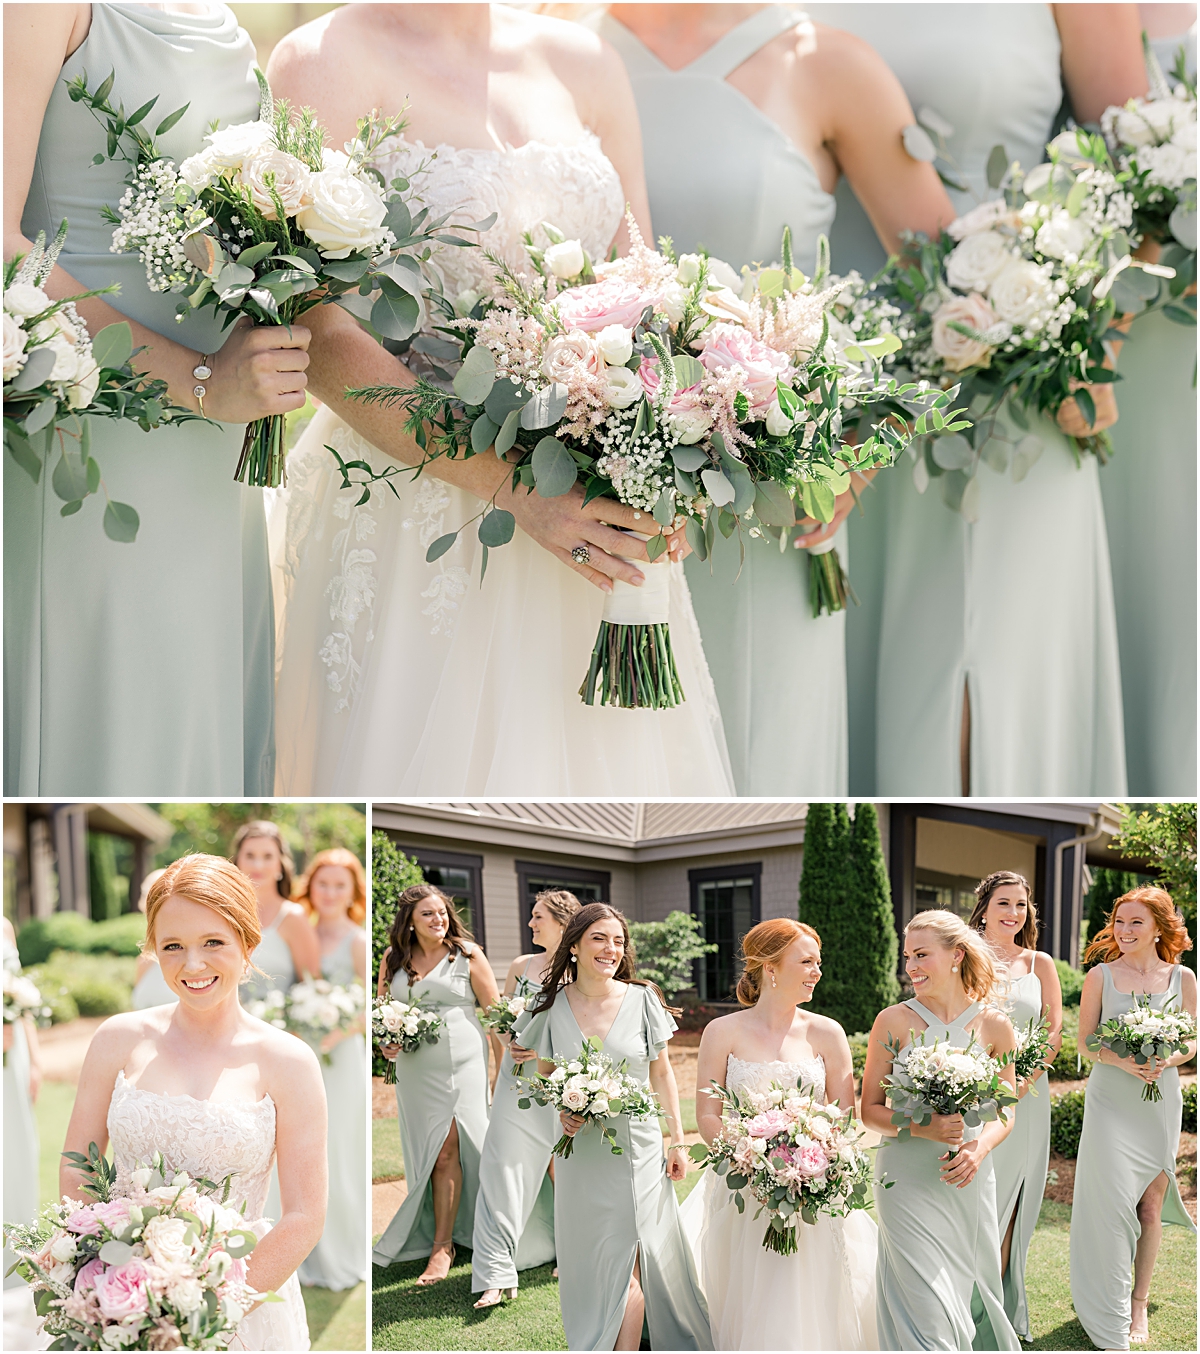 Collage of bride and bridesmaids posing with their bouquets